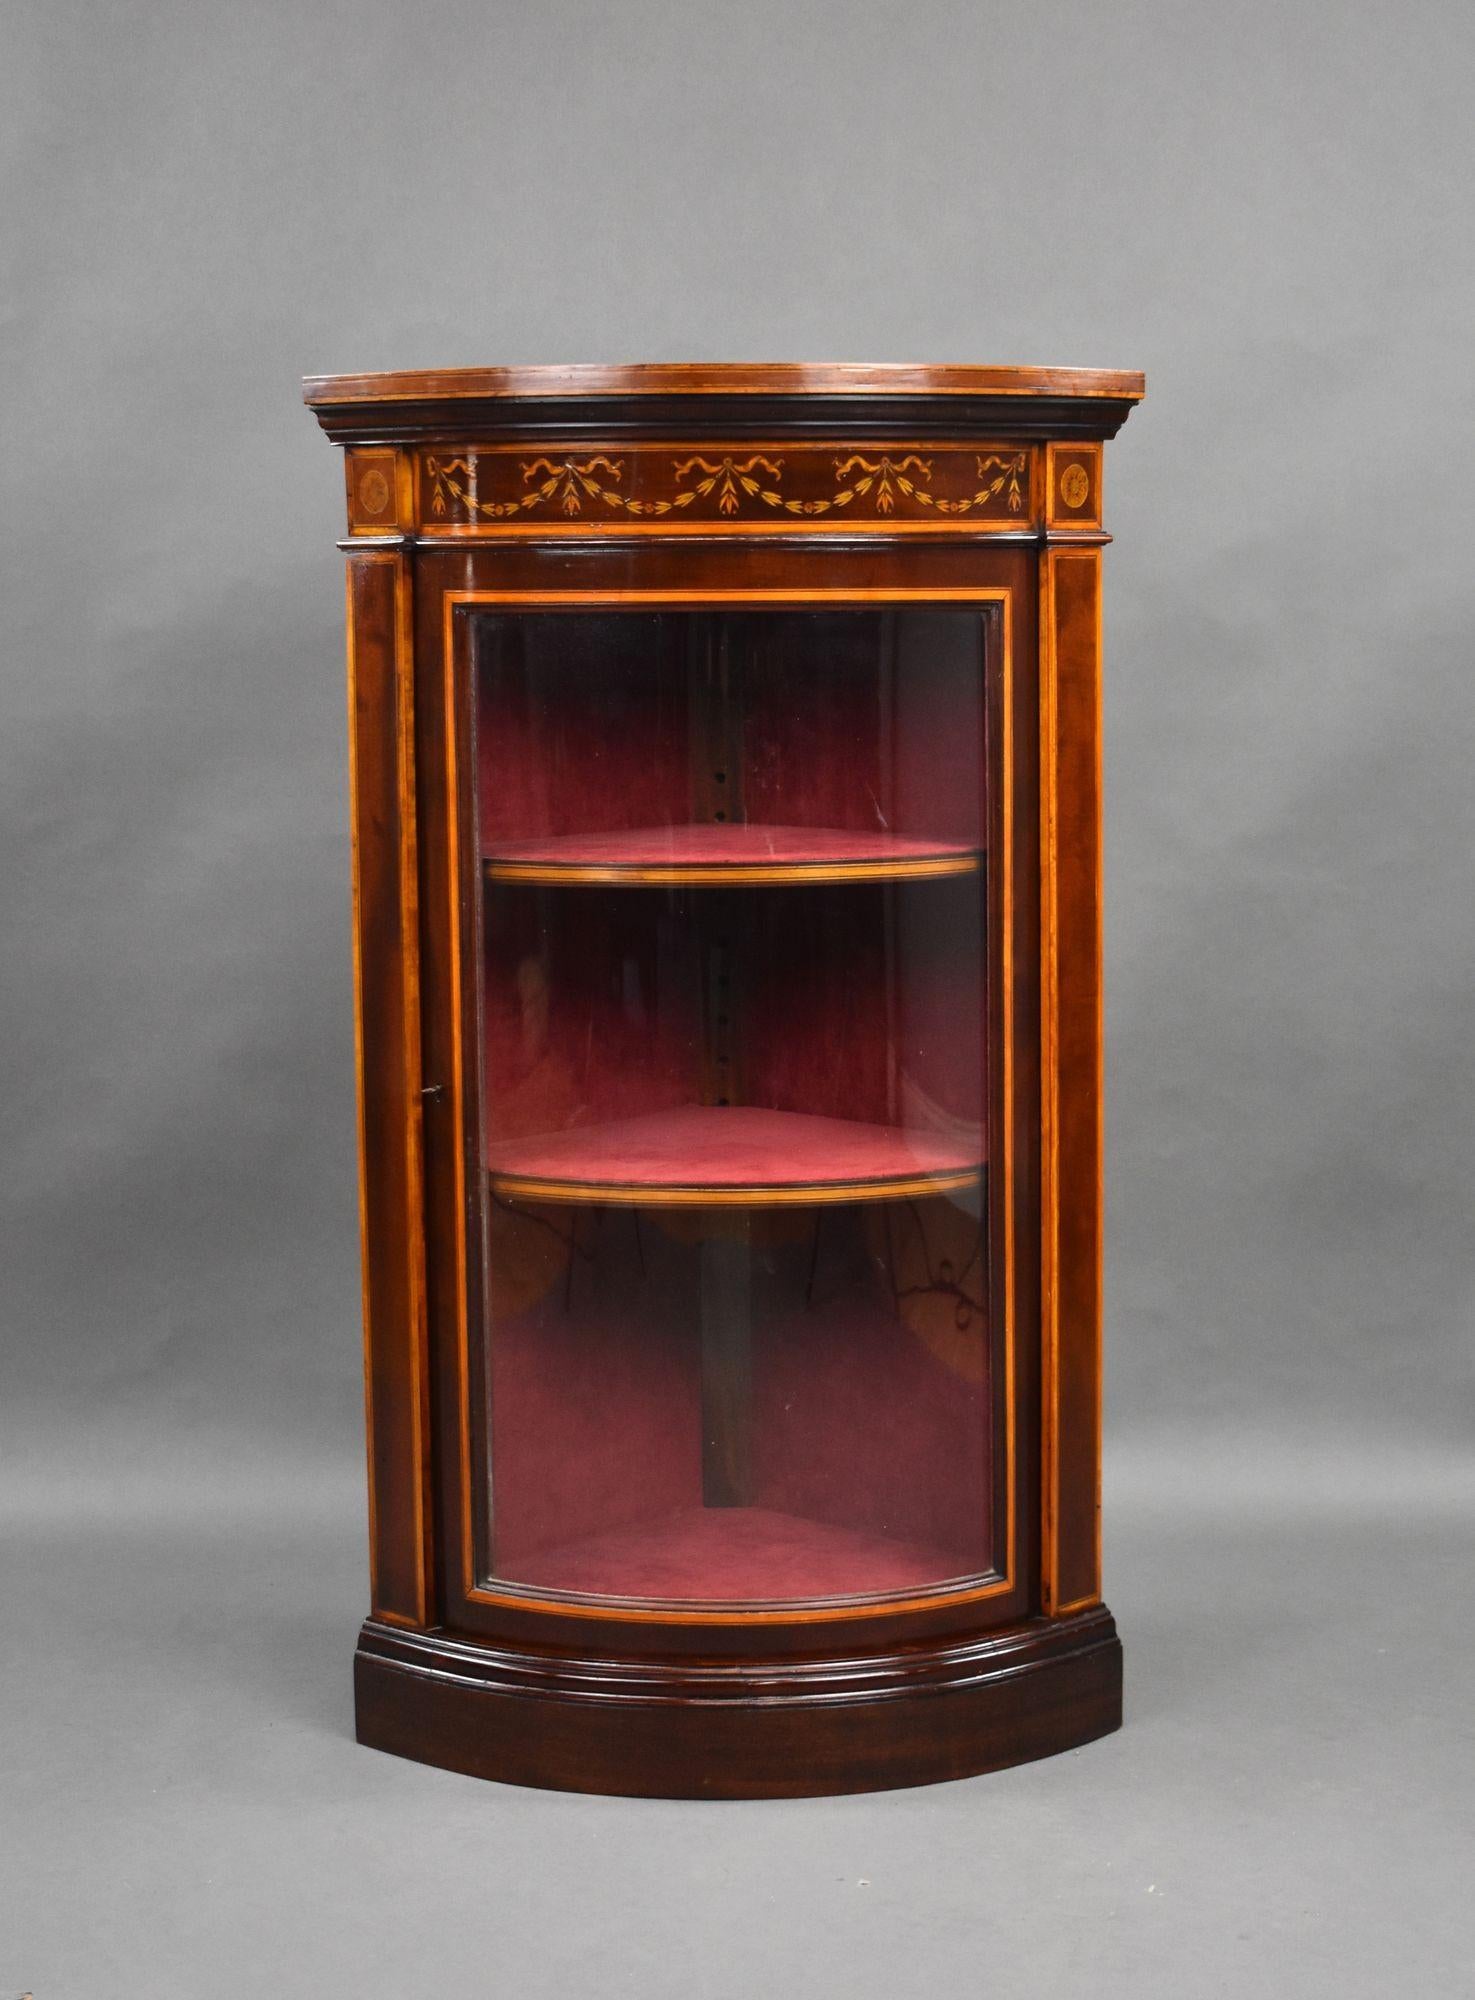 For sale is a fine quality Edwardian inlaid bow front corner cabinet, having line and shell inlays to the top, above a single glass bowed door, above a plinth base, the cabinet remains in excellent condition for its age.

Width: 58cm Depth: 44cm